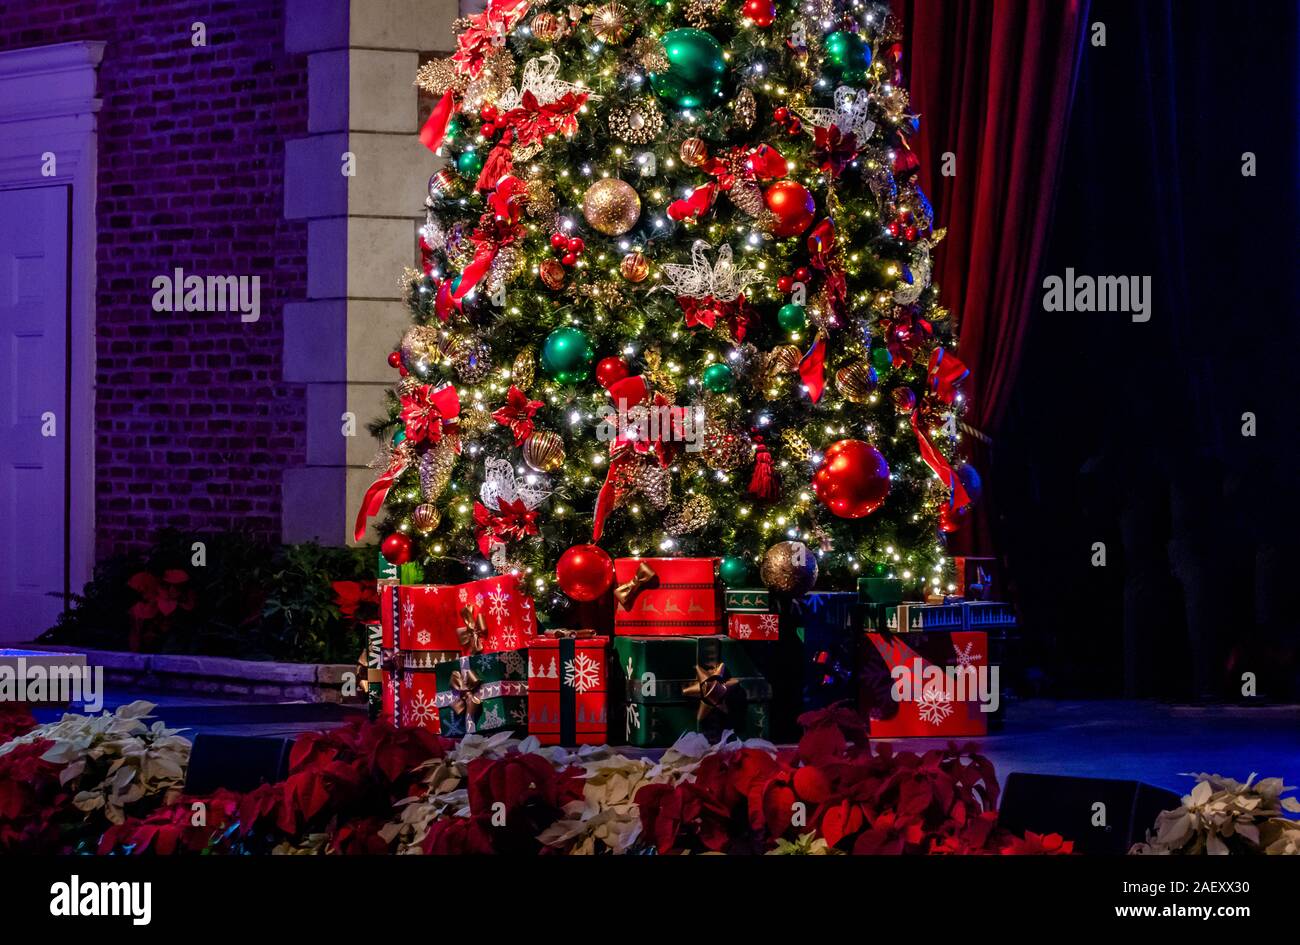 Orlando, Florida. December 03, 2019. Partial view of colorful Christmas tree at Epcot. Stock Photo